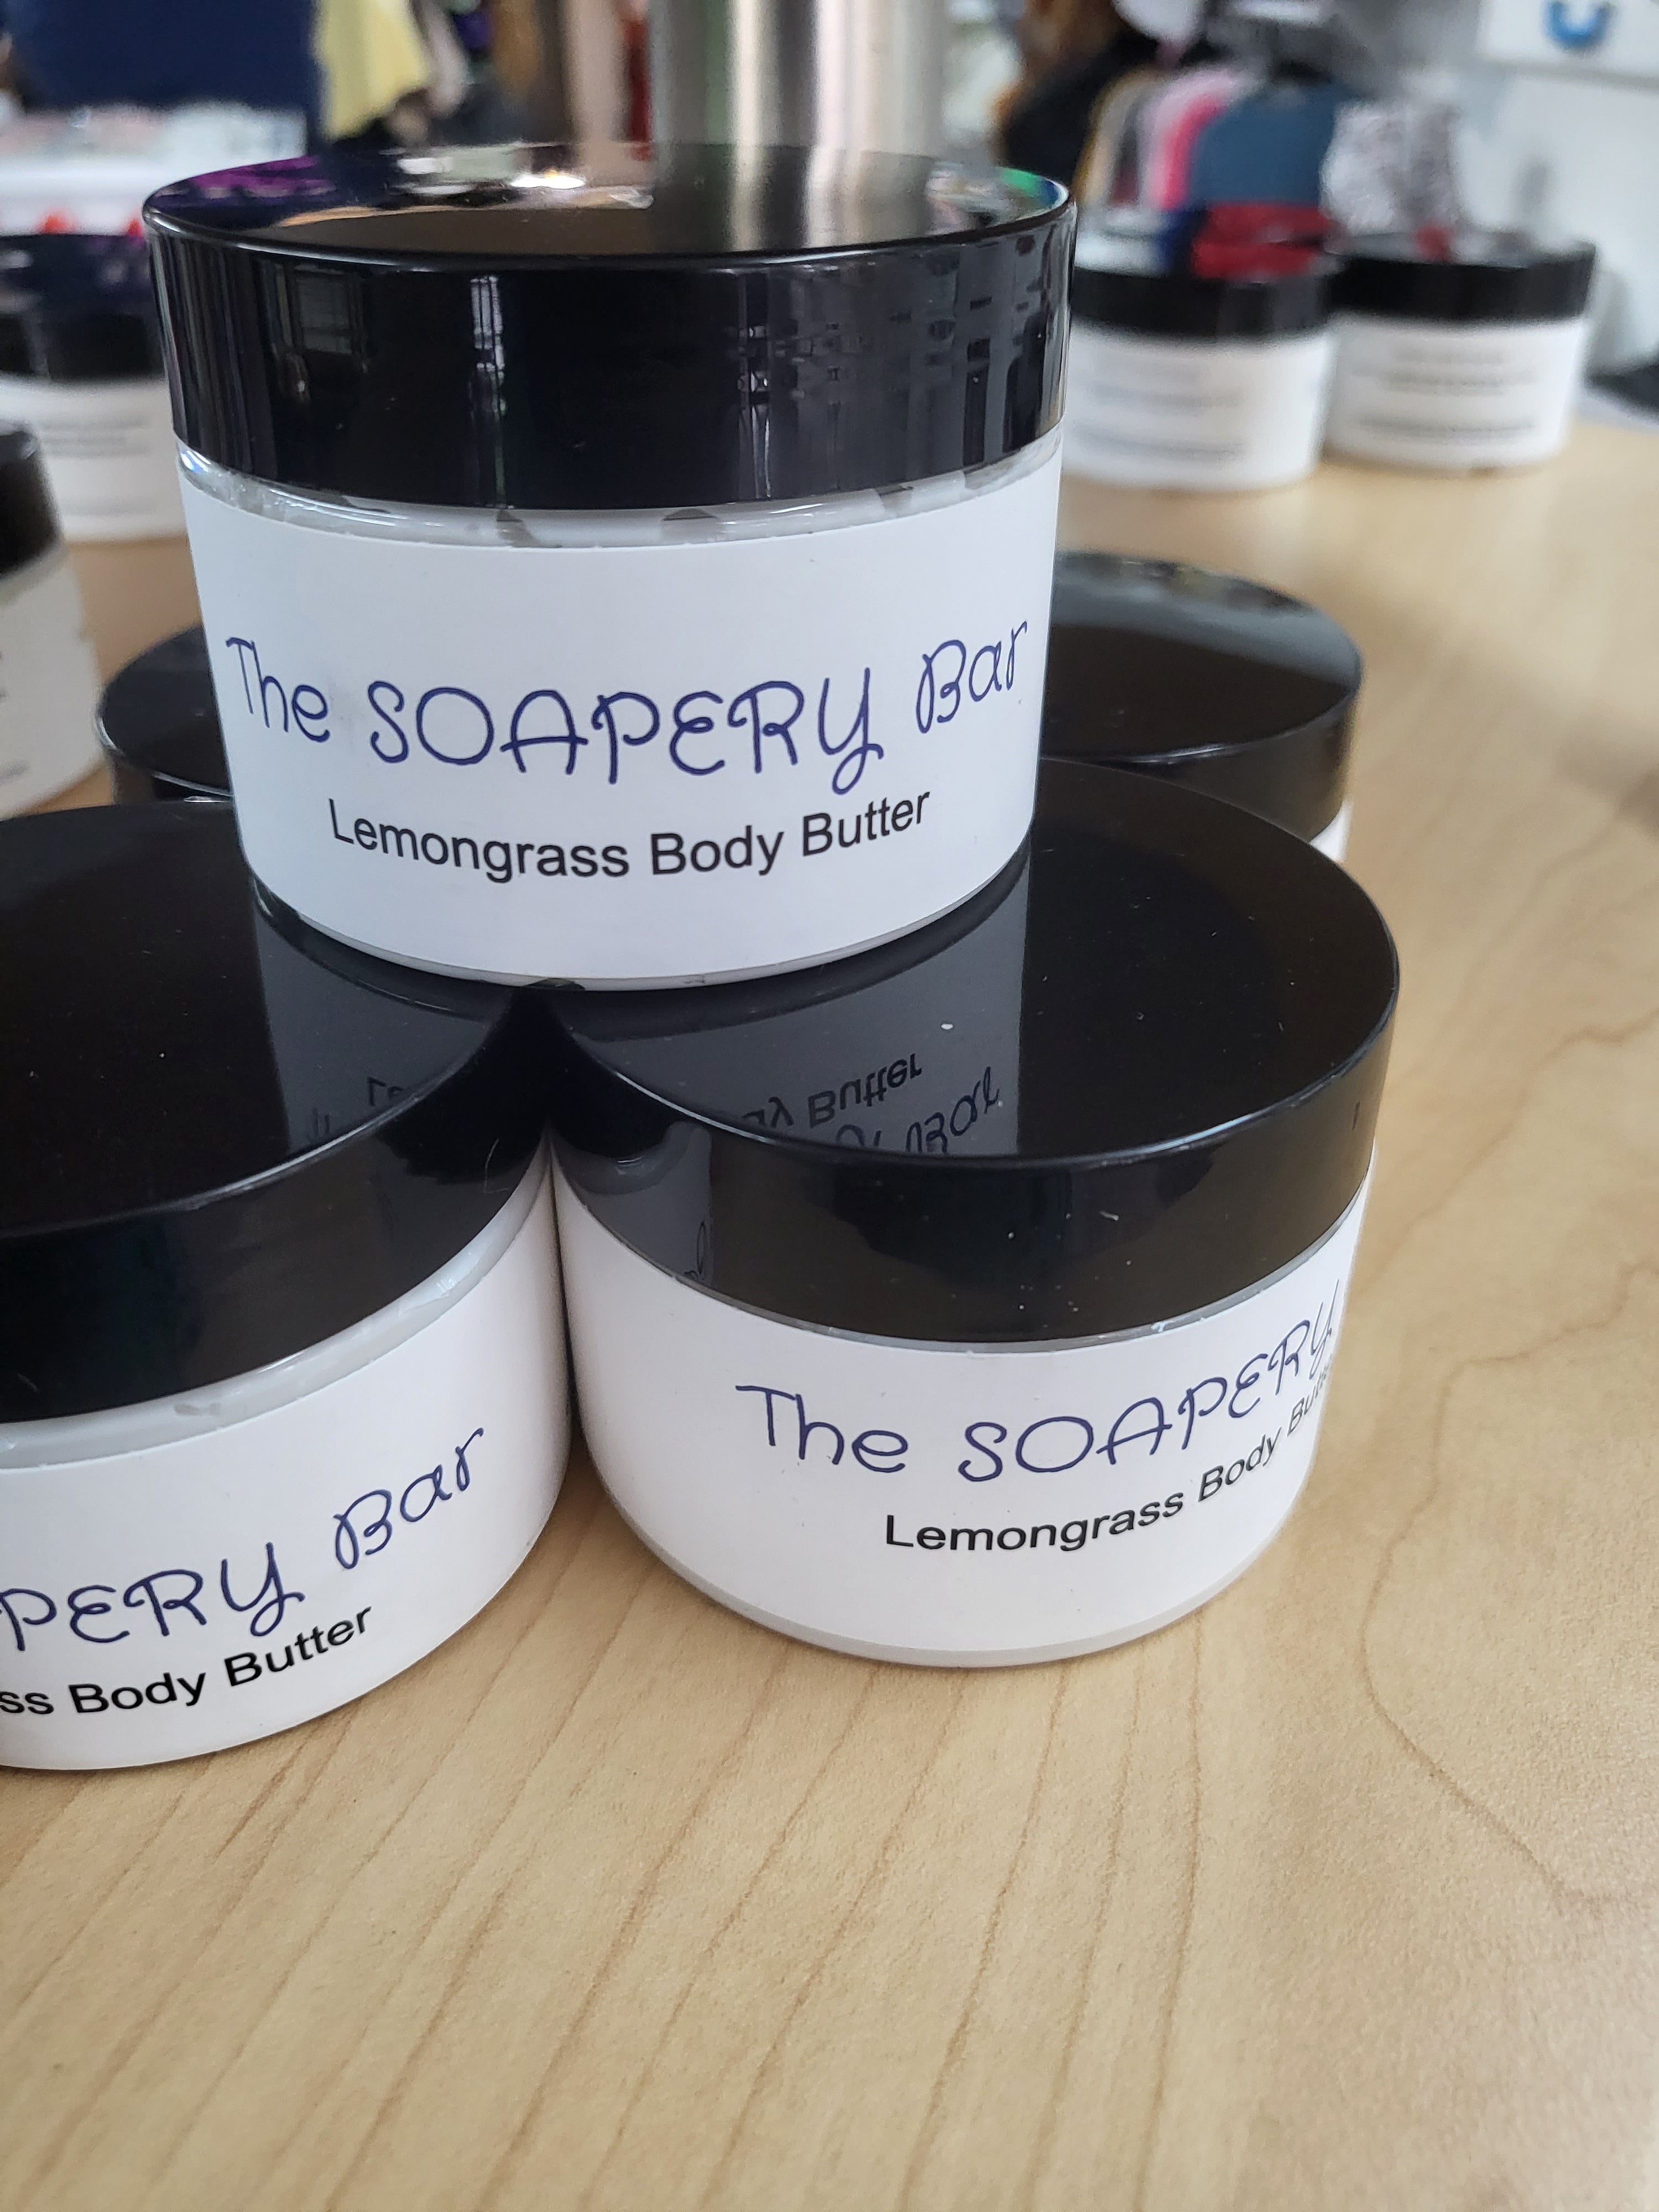 SHOP THE SOAPERY